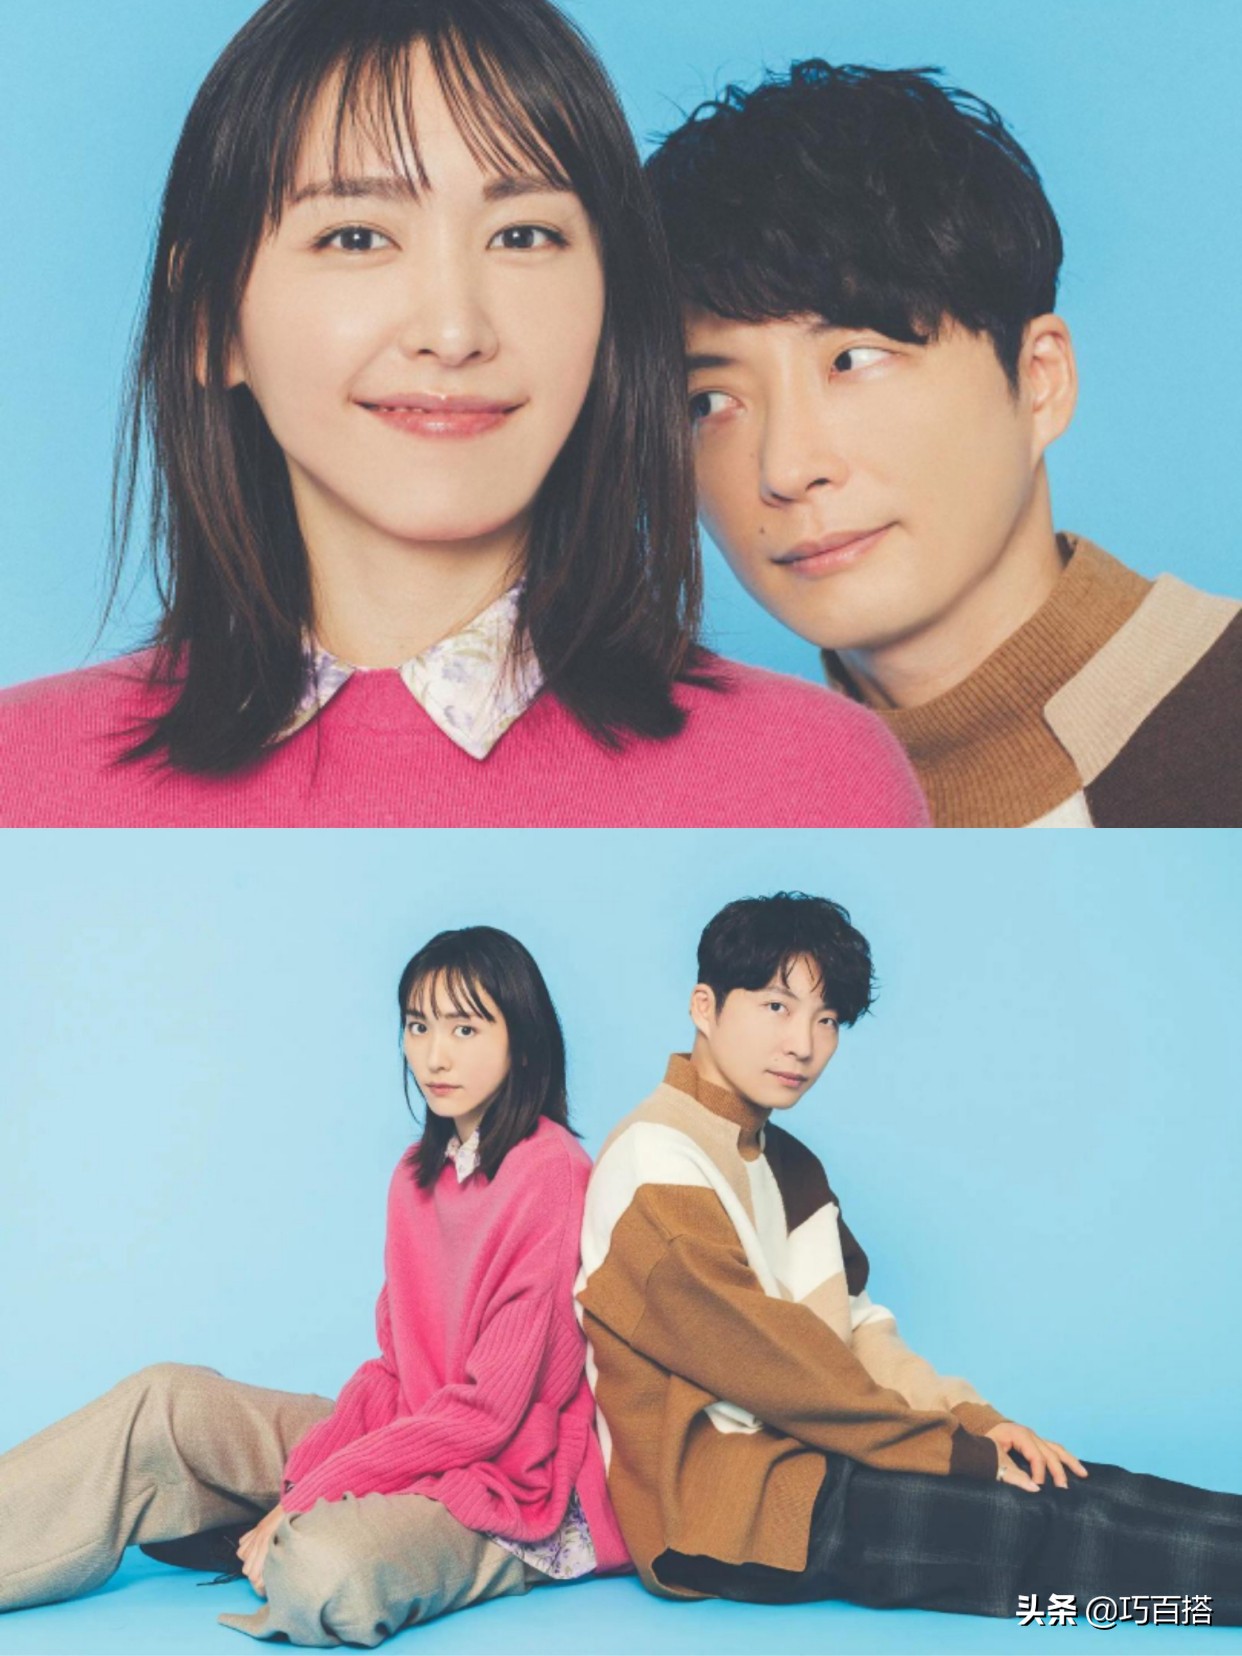 Yui Aragaki and Gen Hoshino are too married, they are in the same frame ...